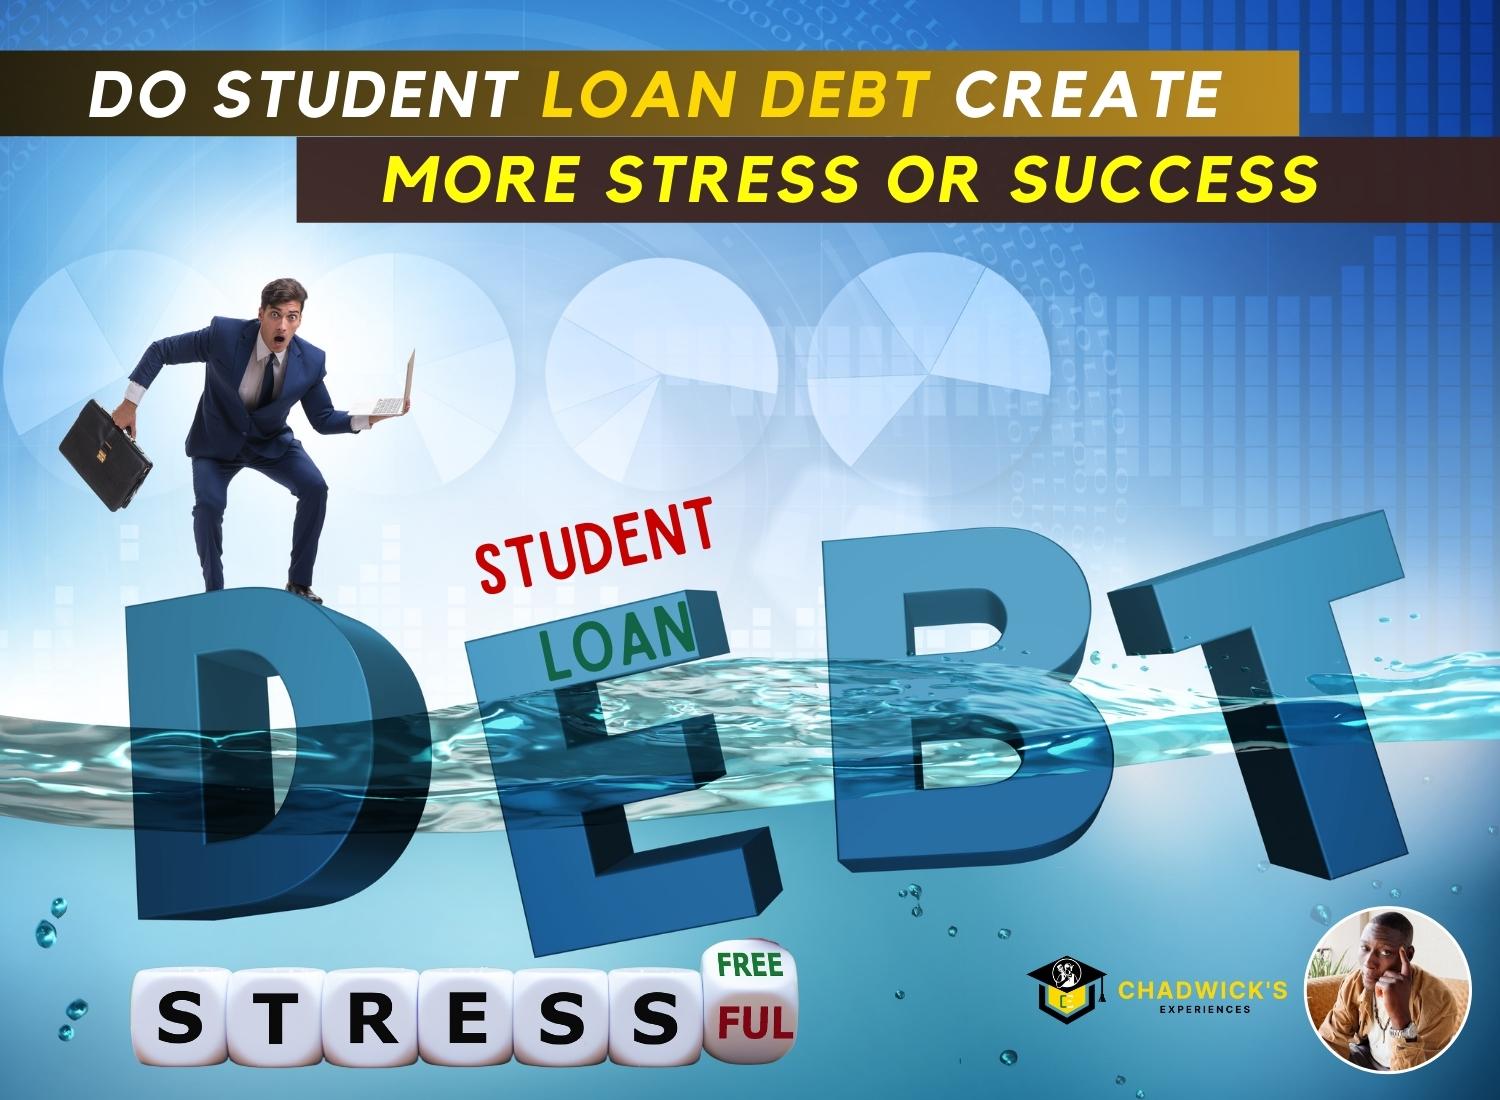 Do Student Loan Debt Create more Stress or Success